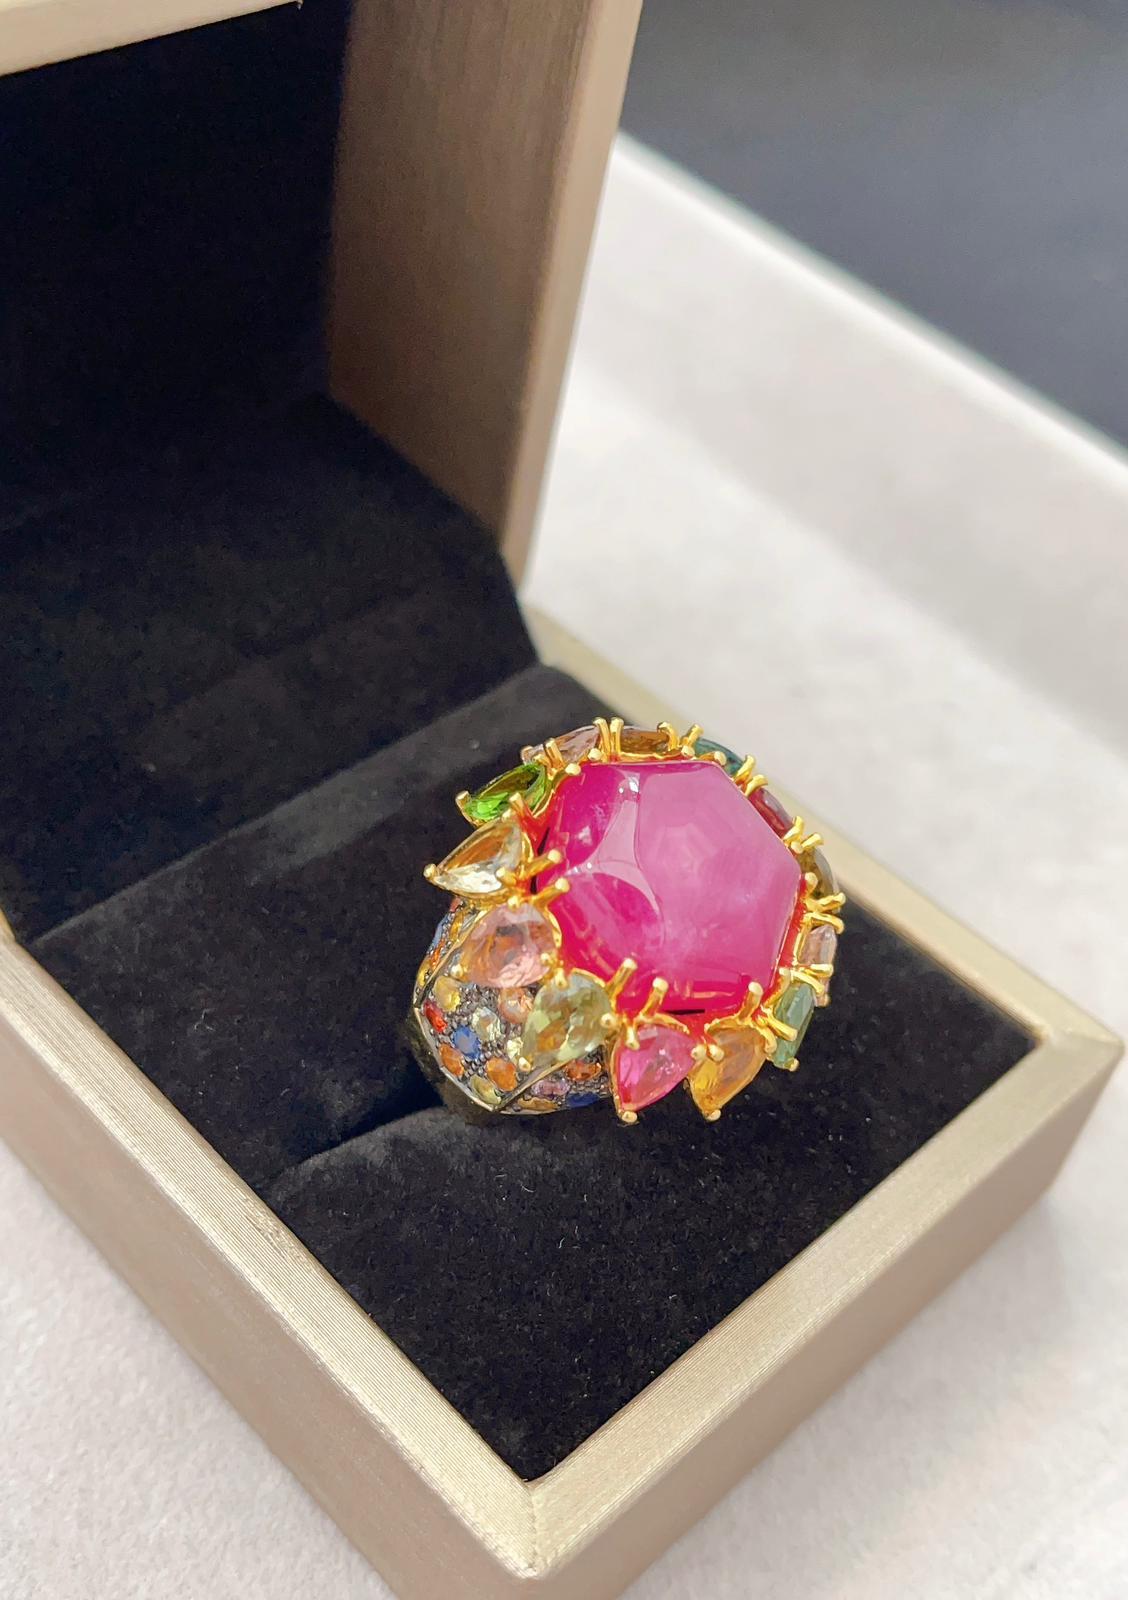 Bochic “Capri” Red Ruby & Multi Color SapphireCocktail Ring Set In 22K Gold & Silver 
Multi natural gem Ring 
Beautiful Natural Red Ruby - 19 carats
Octagon Cabochon shape 
Natural Multi Fancy Color Sapphires from Sri Lanka - 16 carats 
Round and